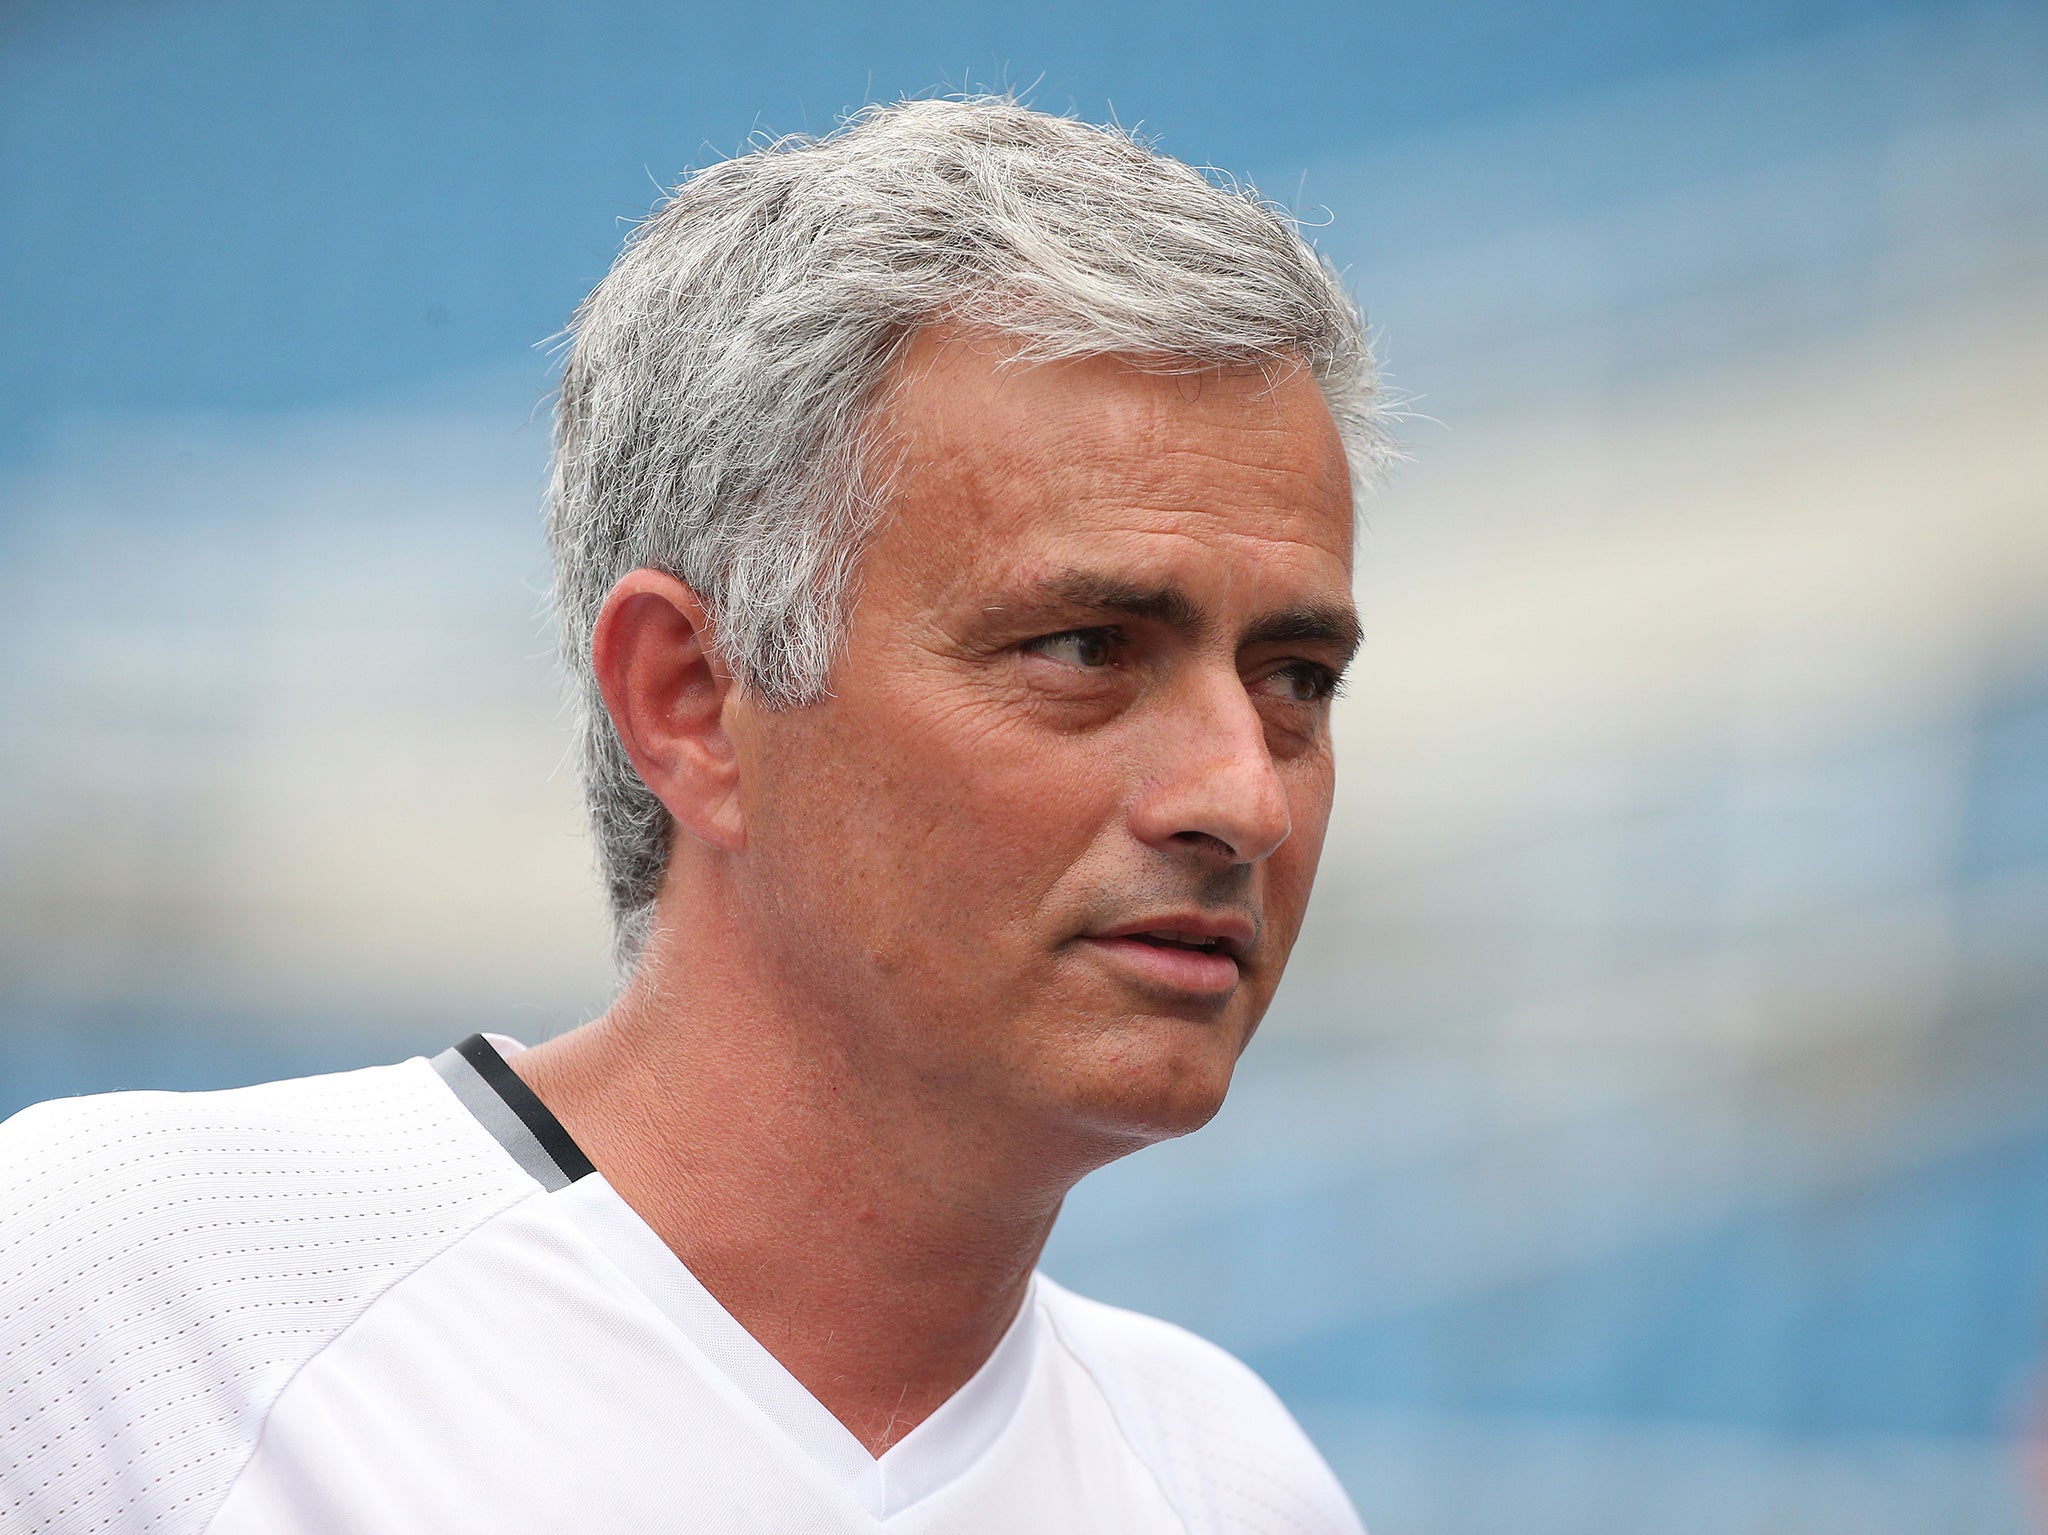 Mourinho's preparations were frustrated by bad weather in China